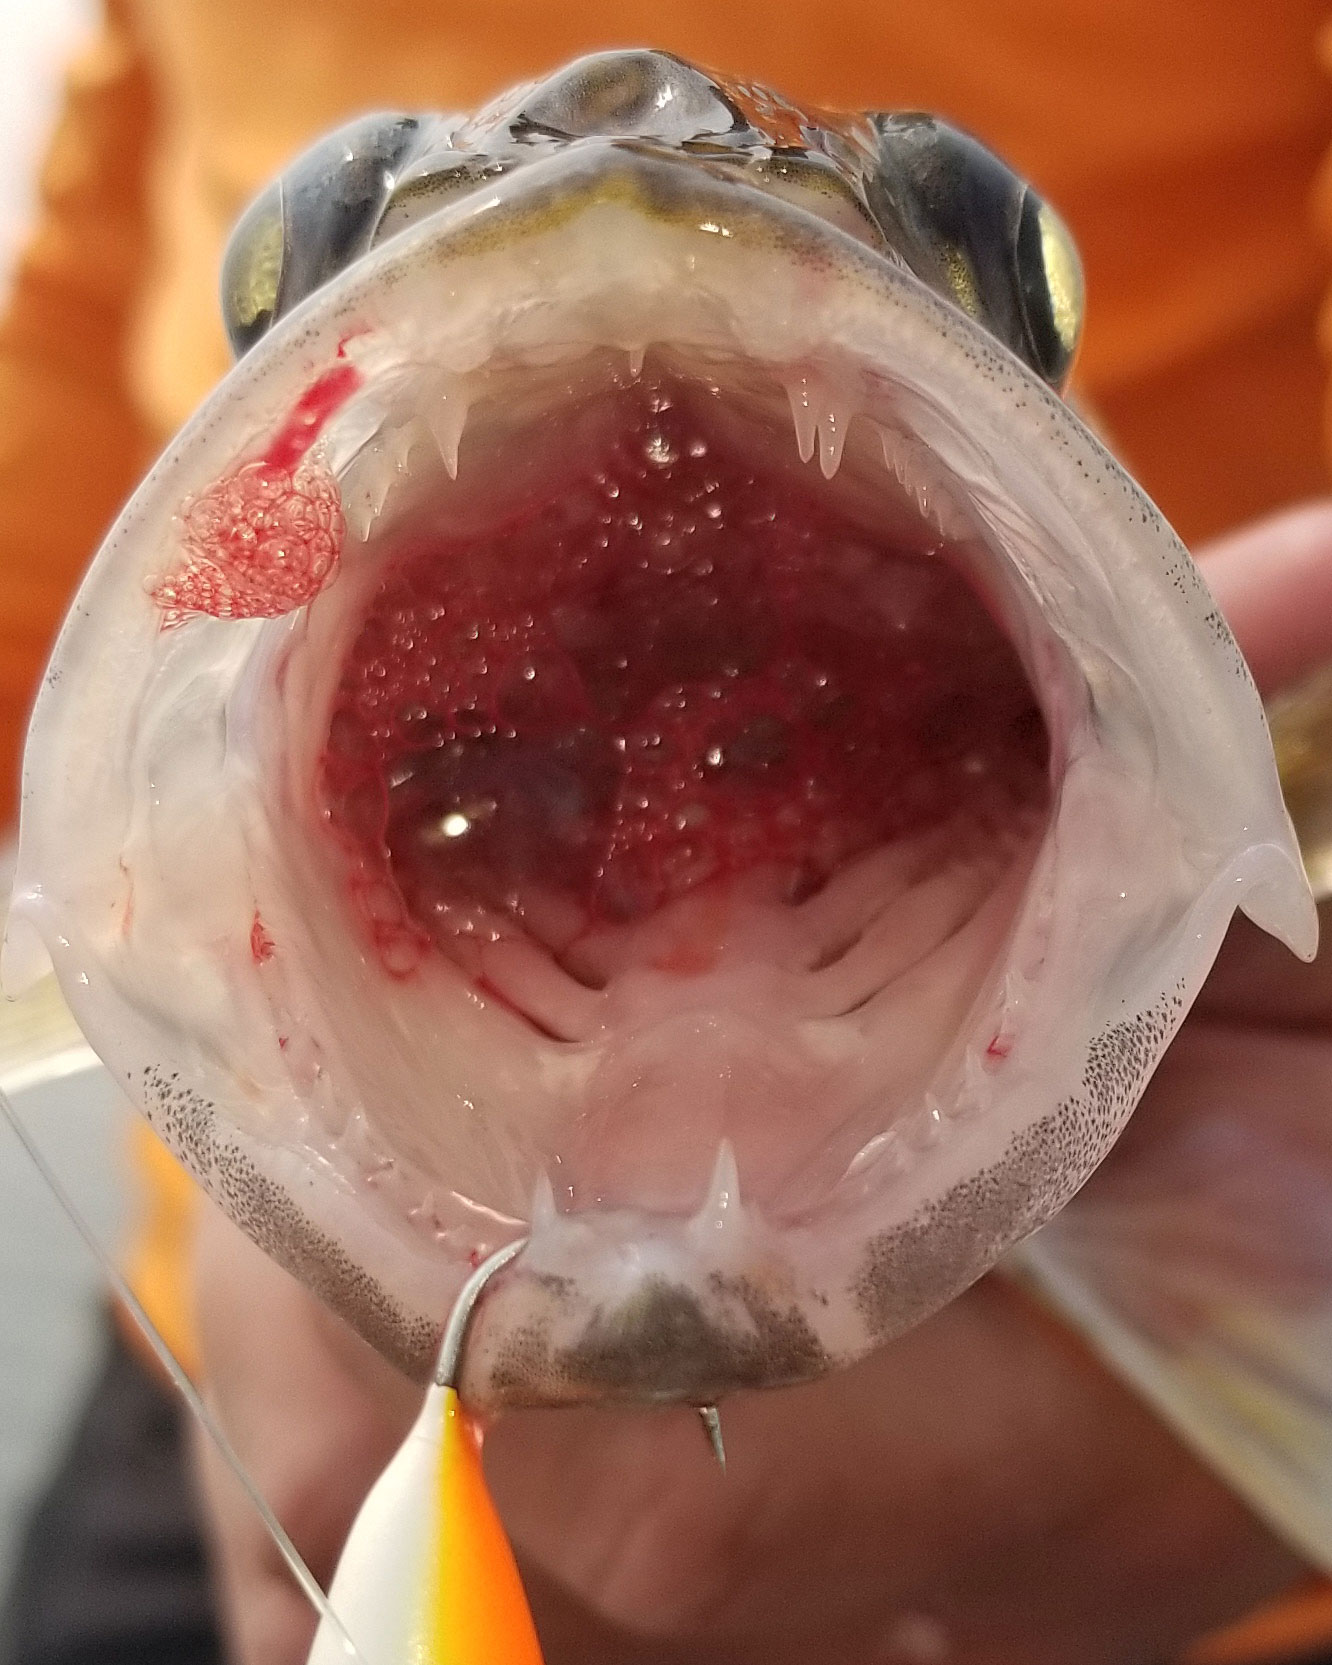 Swollen eyes and bloody mouth of fish with barotrauma